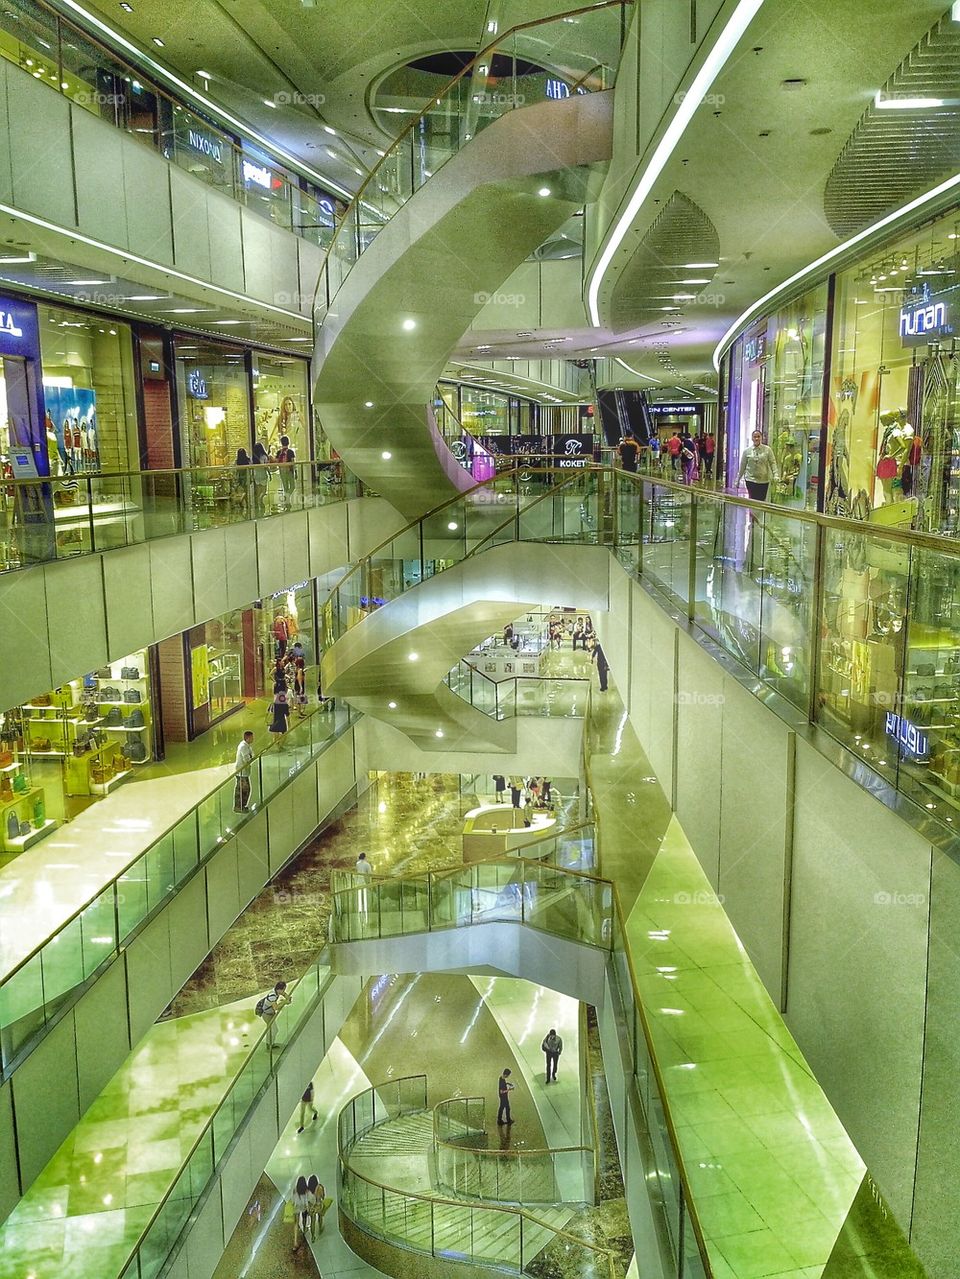 architectural structure of a shopping mall